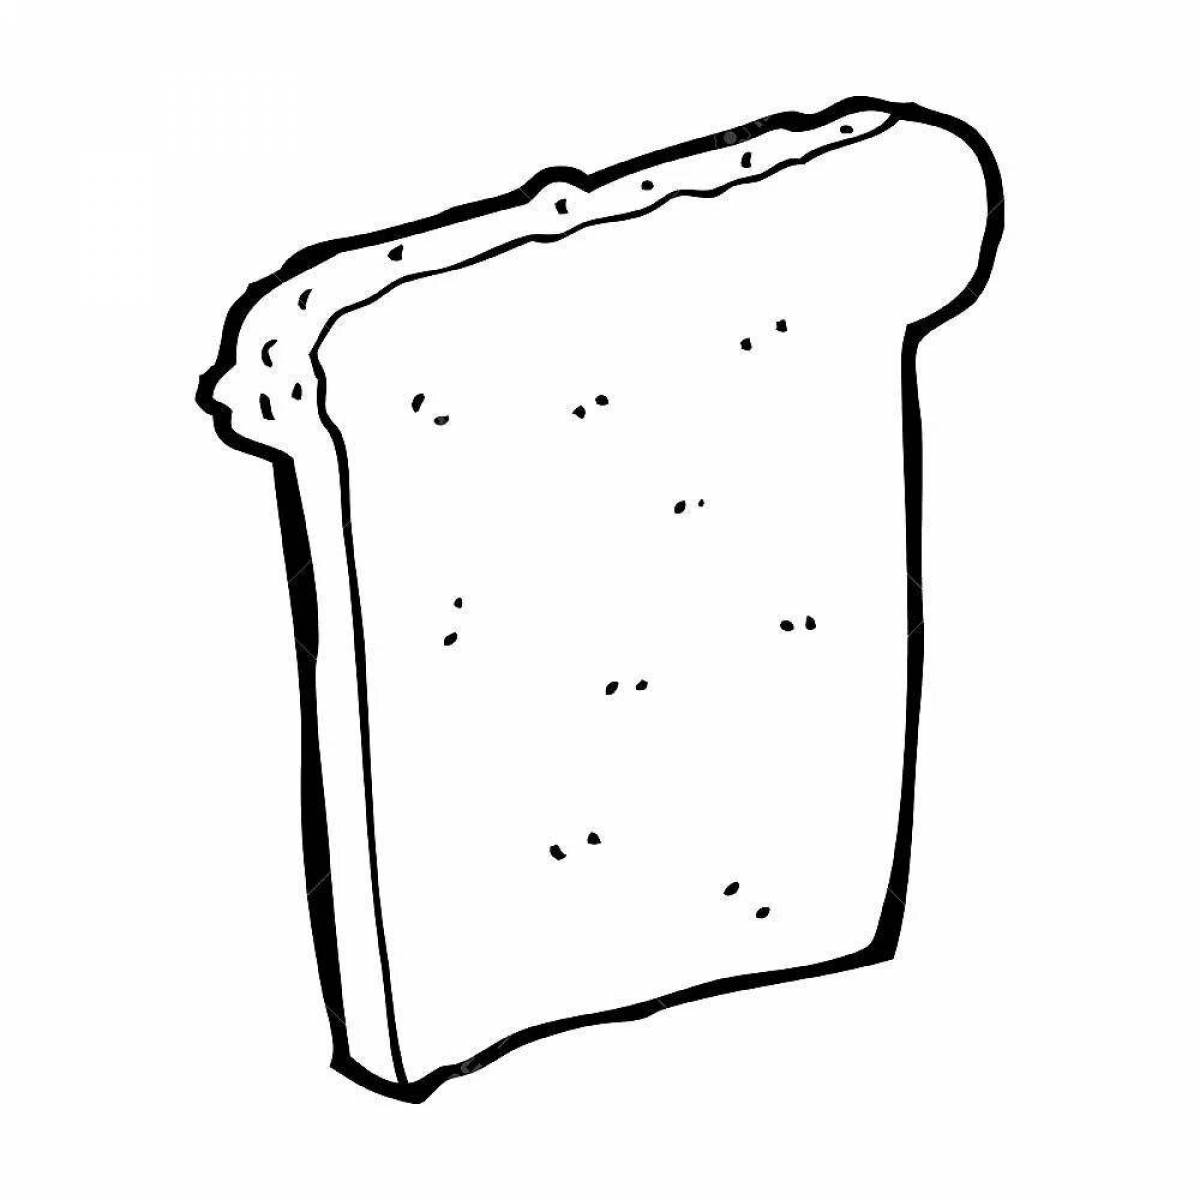 Coloring a piece of bread with soft crumbs